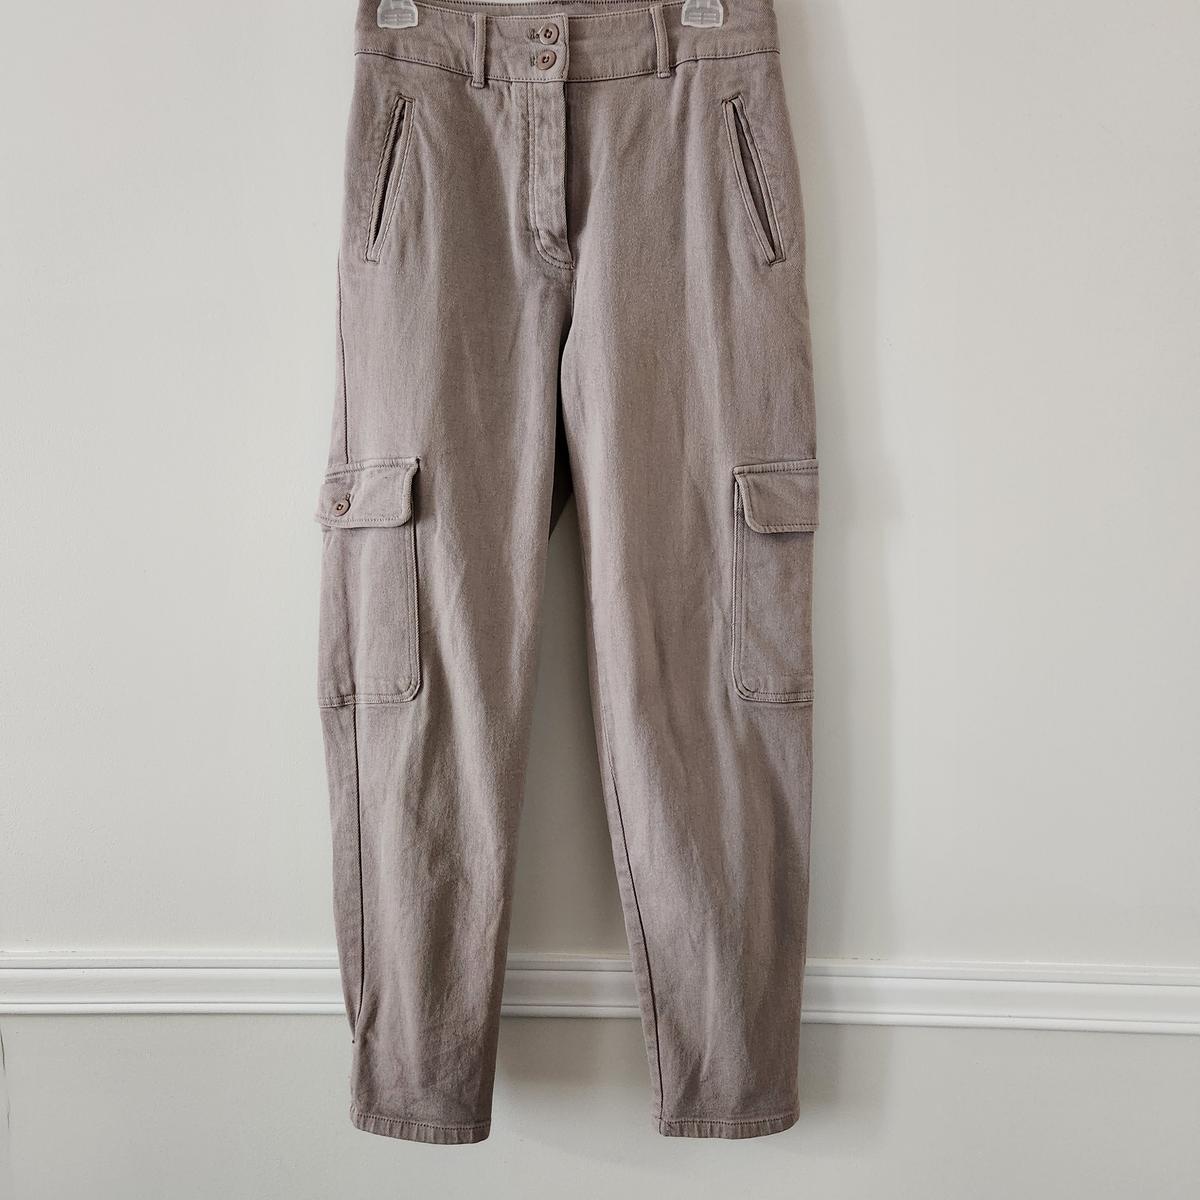 Photo of Wilfred/Aritzia cargo pant 6